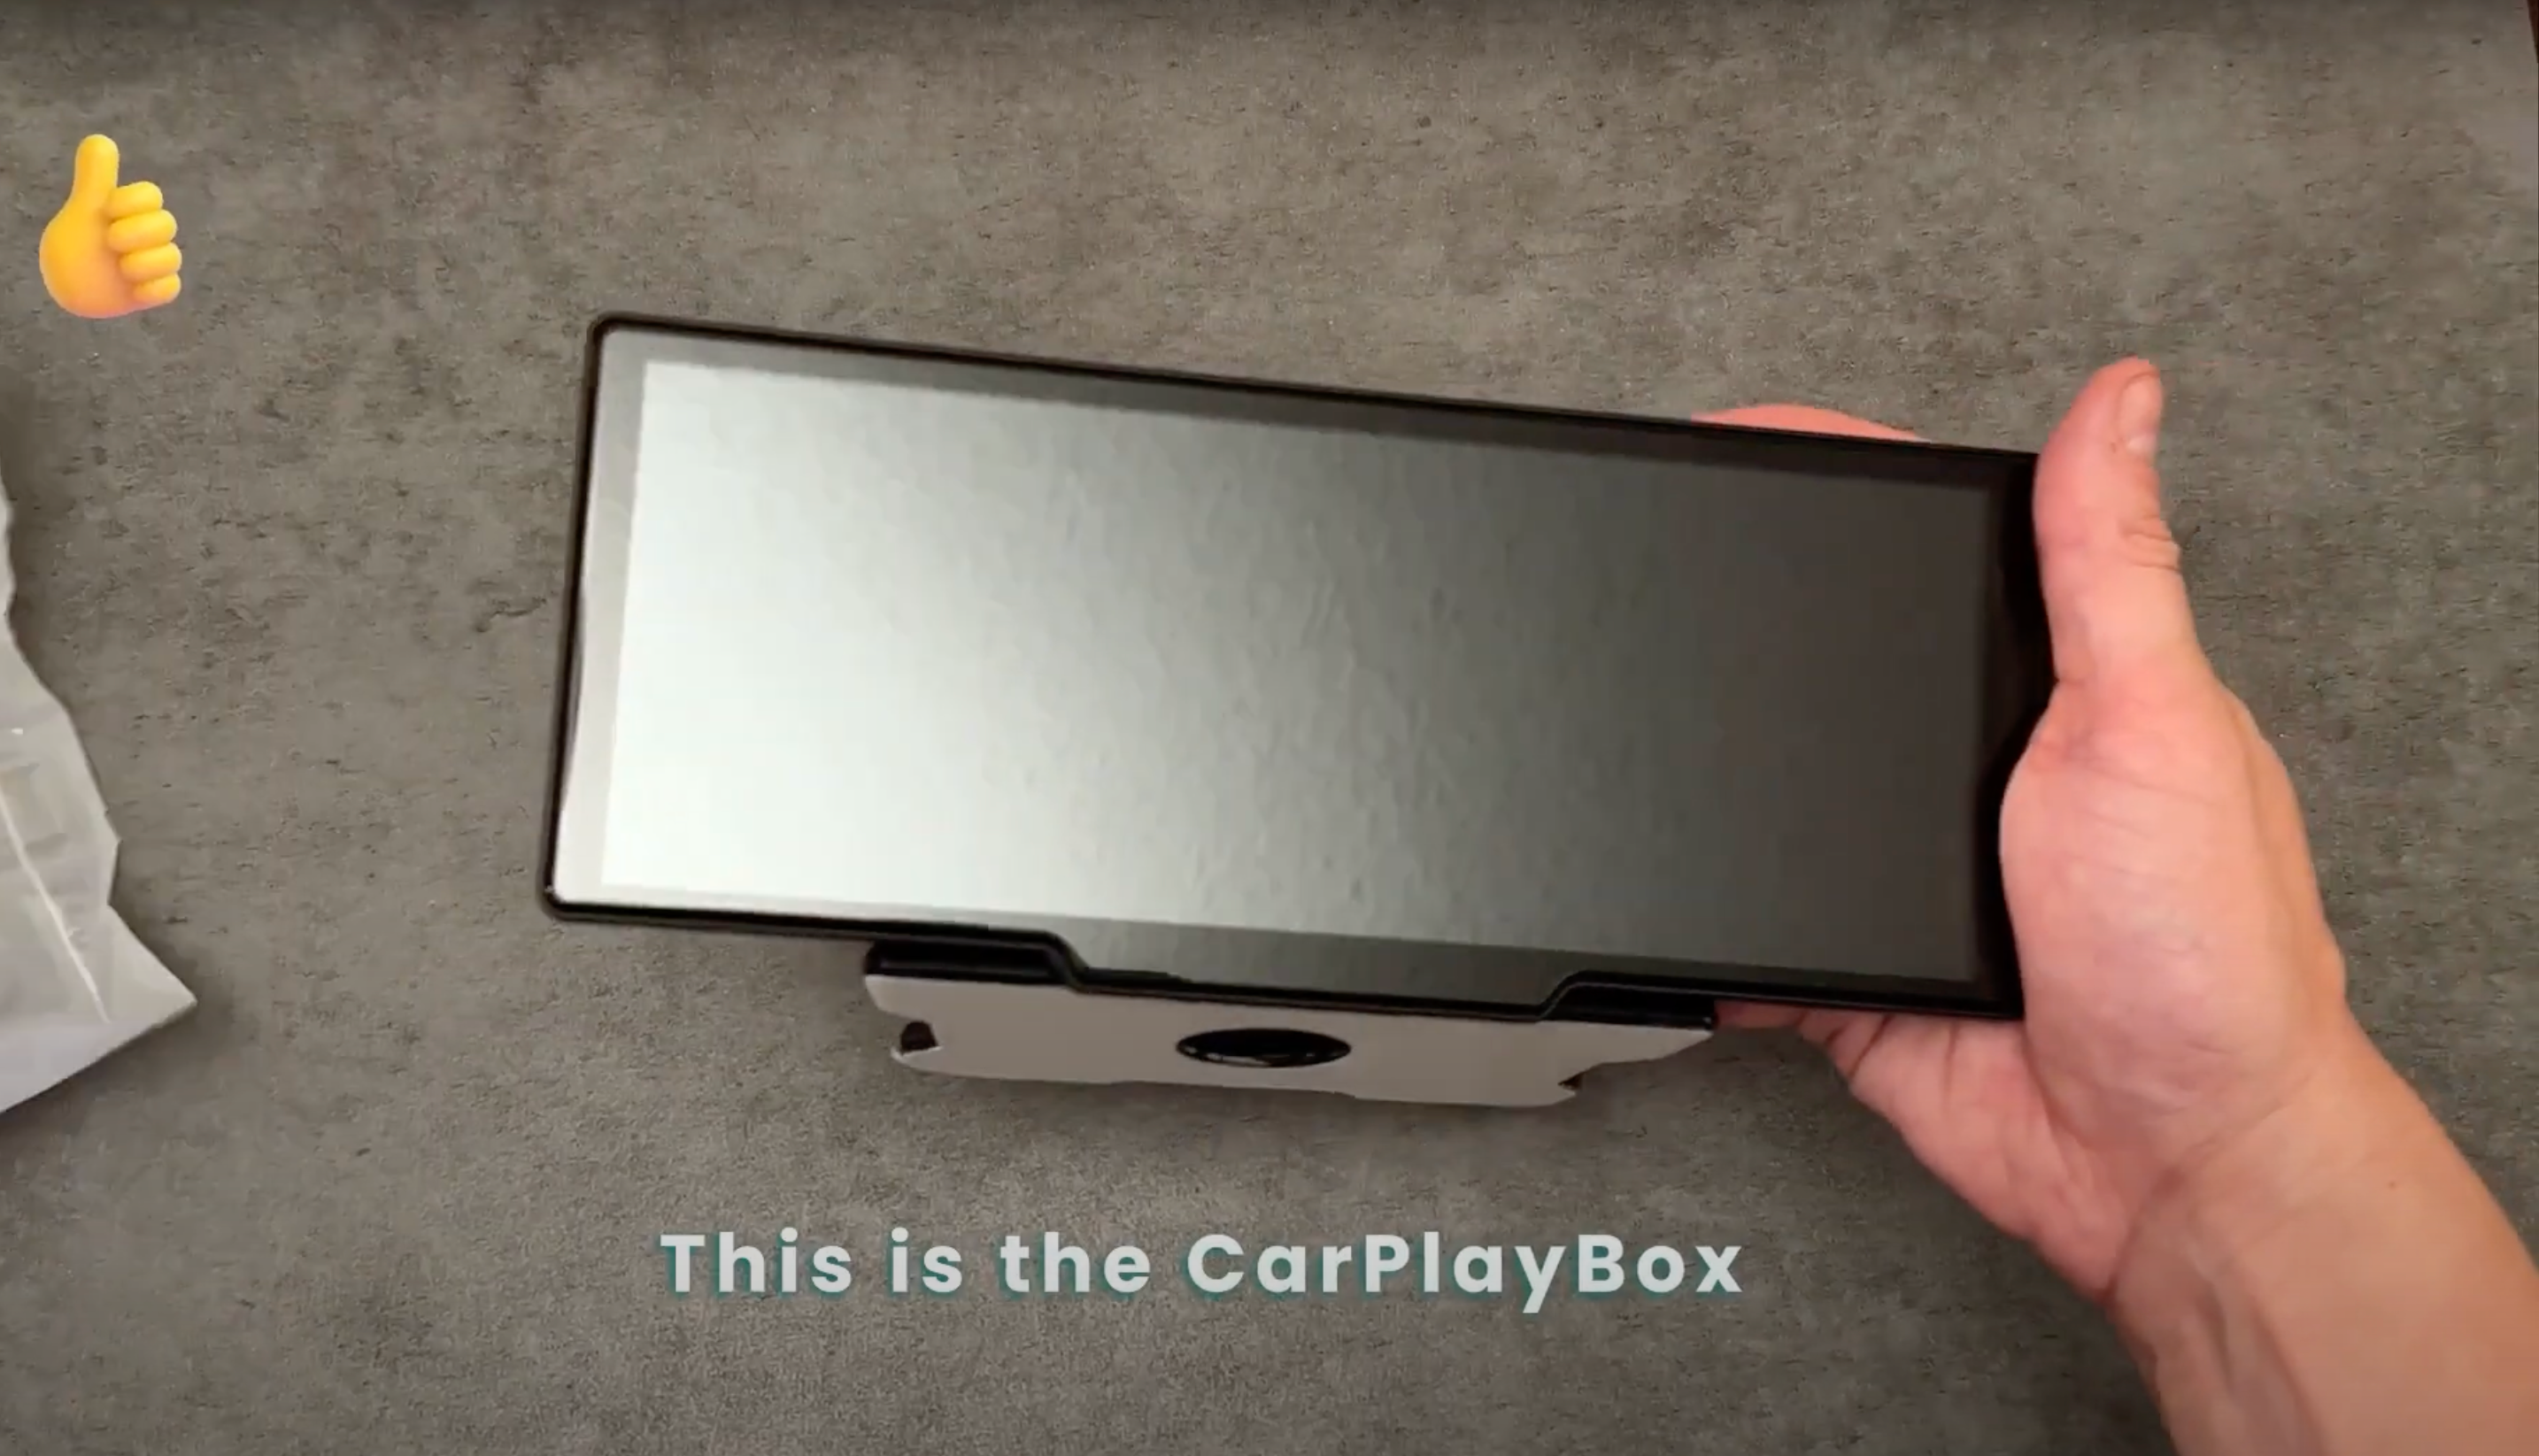 Load video: CarPlayBox 4K video review from East Coast Jeep SRT on YouTube